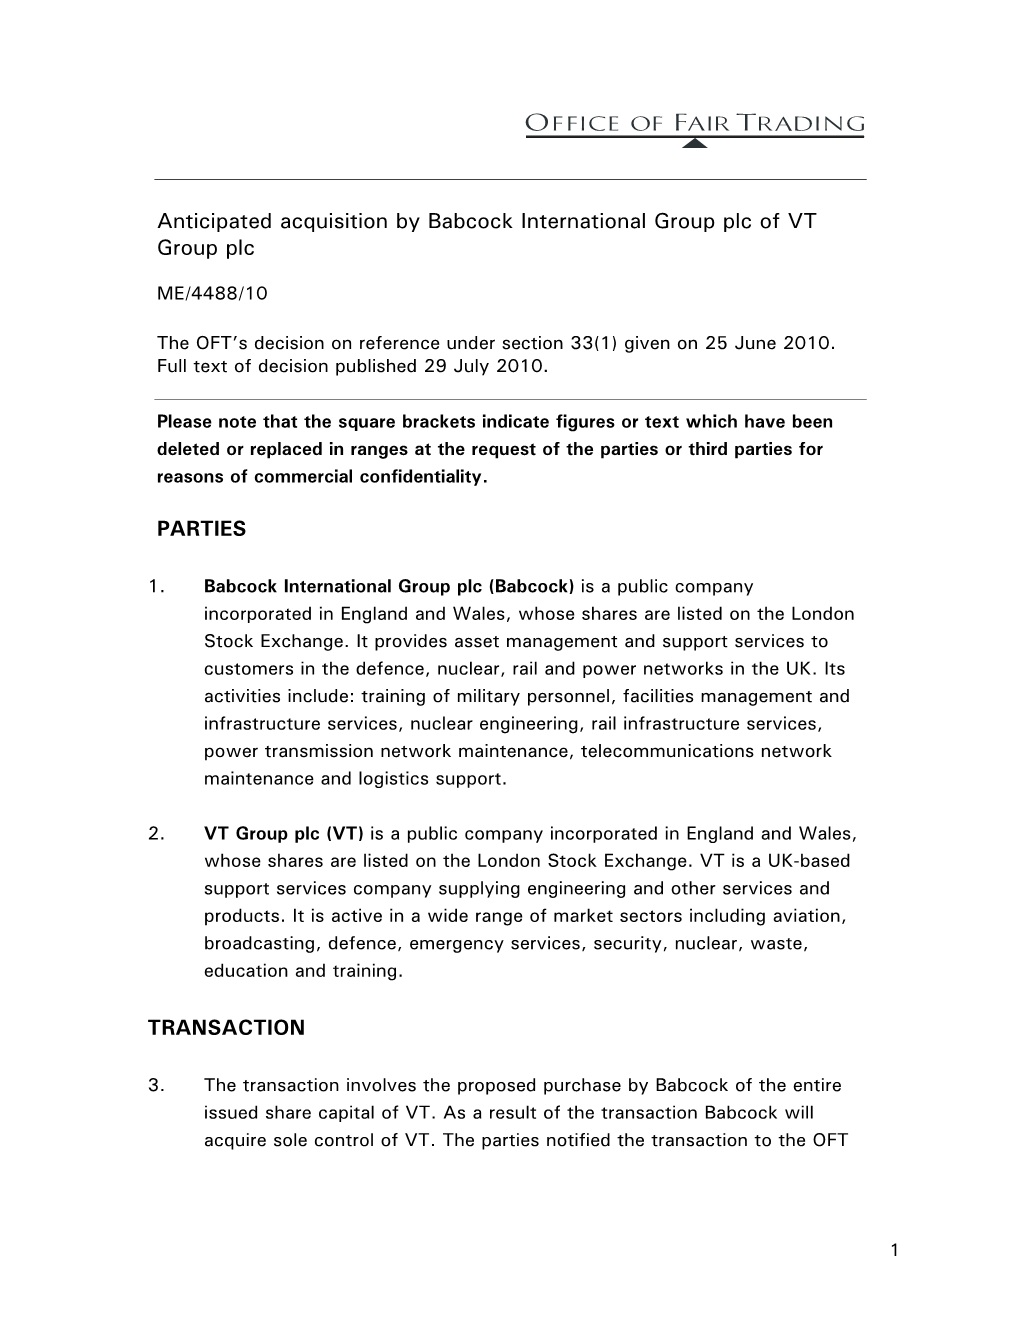 Anticipated Acquisition by Babcock International Group Plc of VT Group Plc